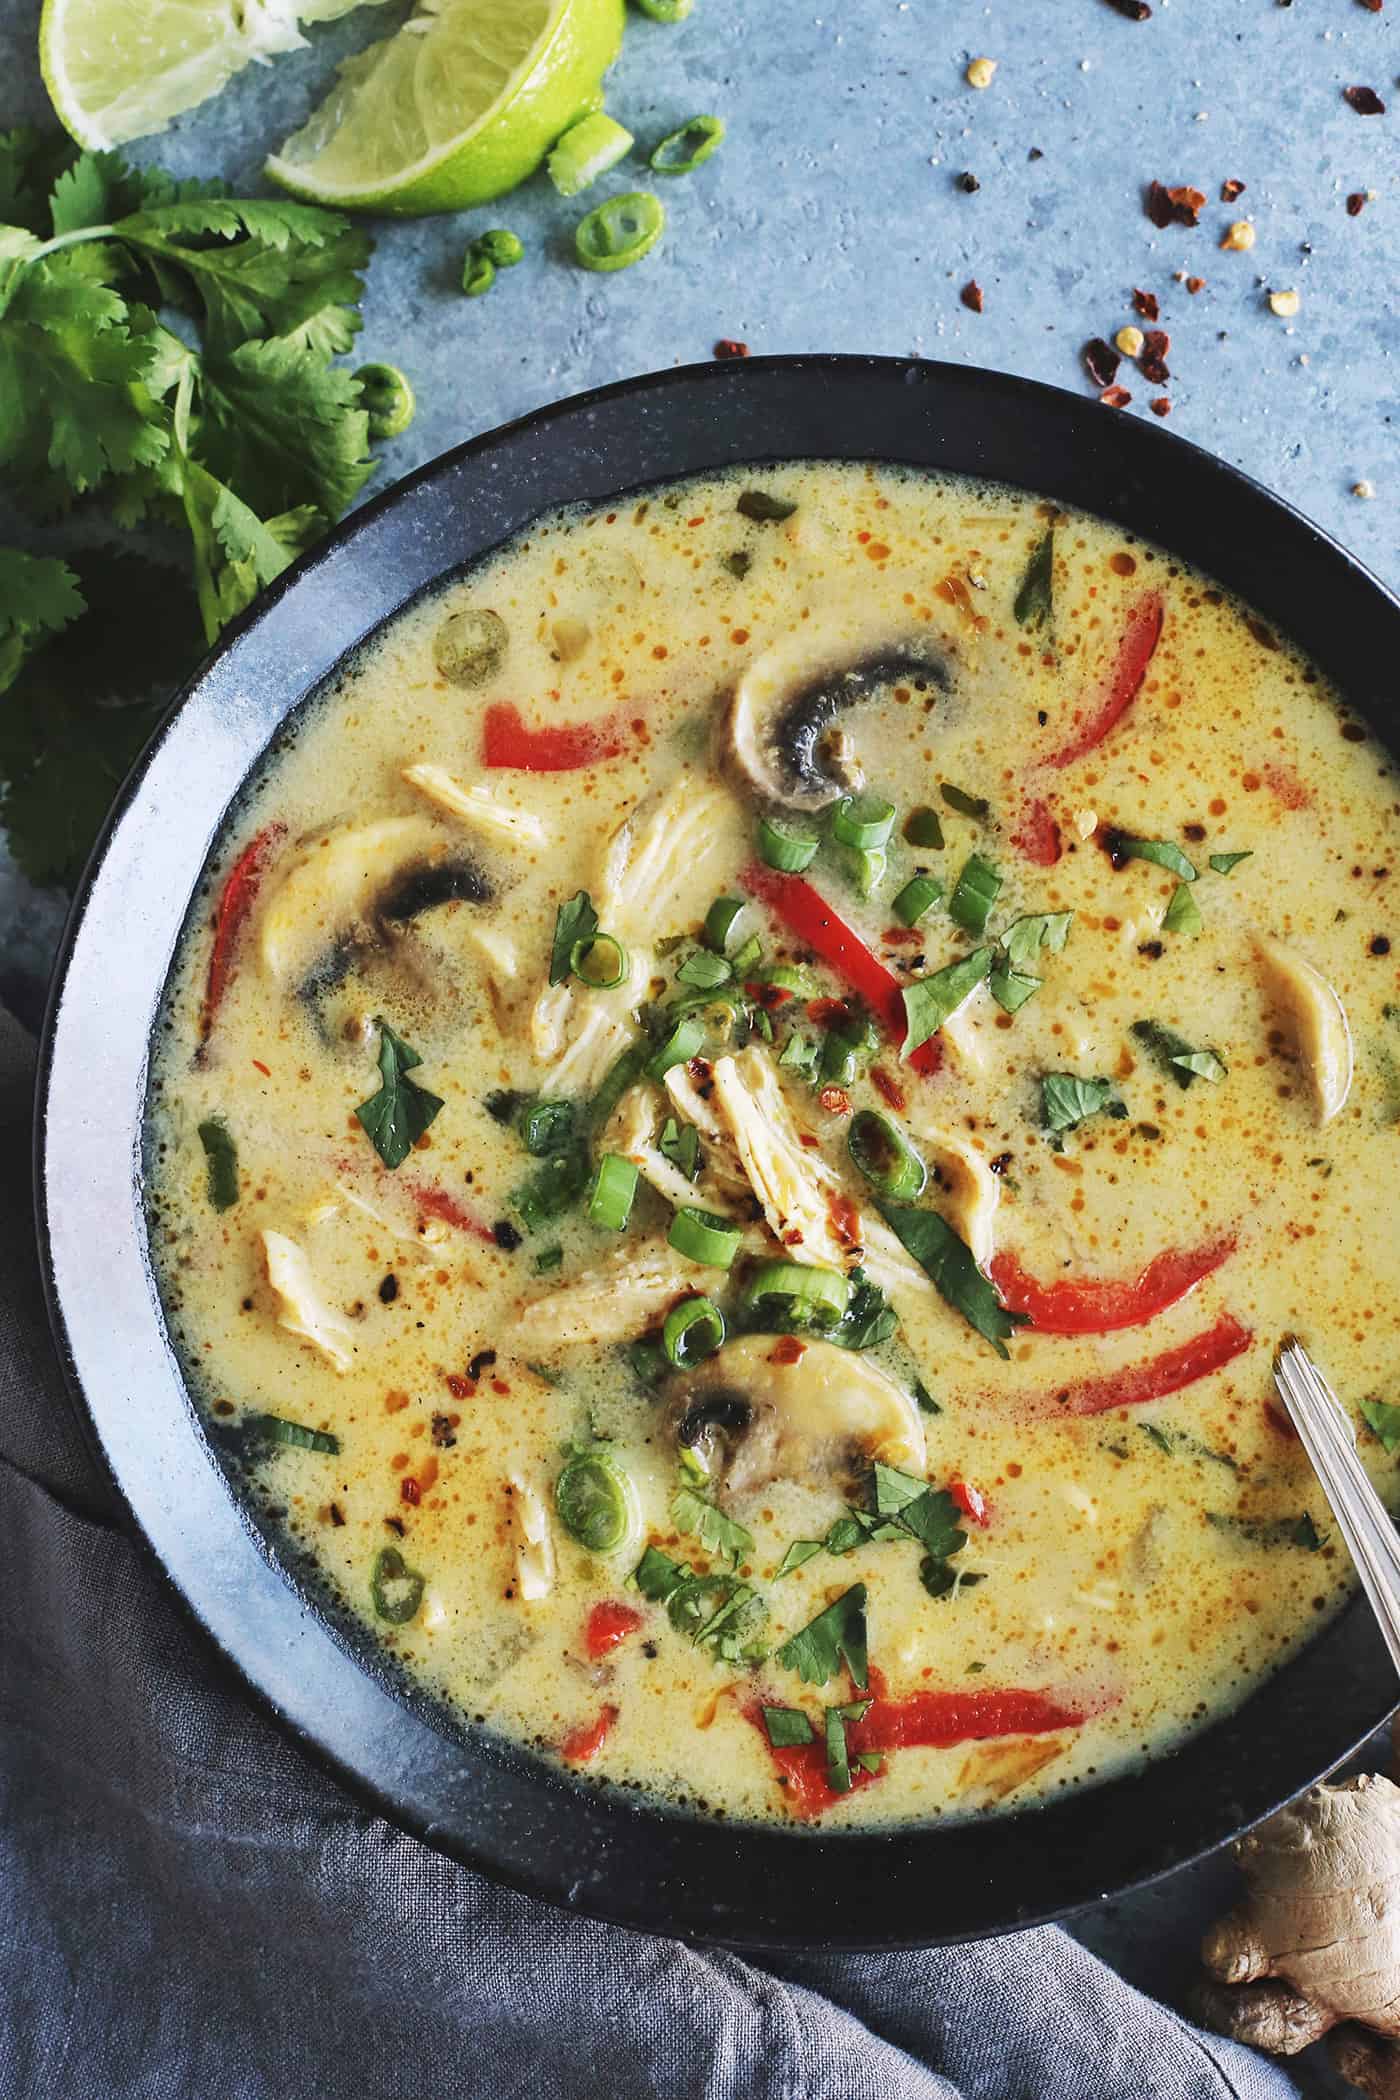 coconut curry soup in a black bowl, with chicken, mushrooms, and red pepper